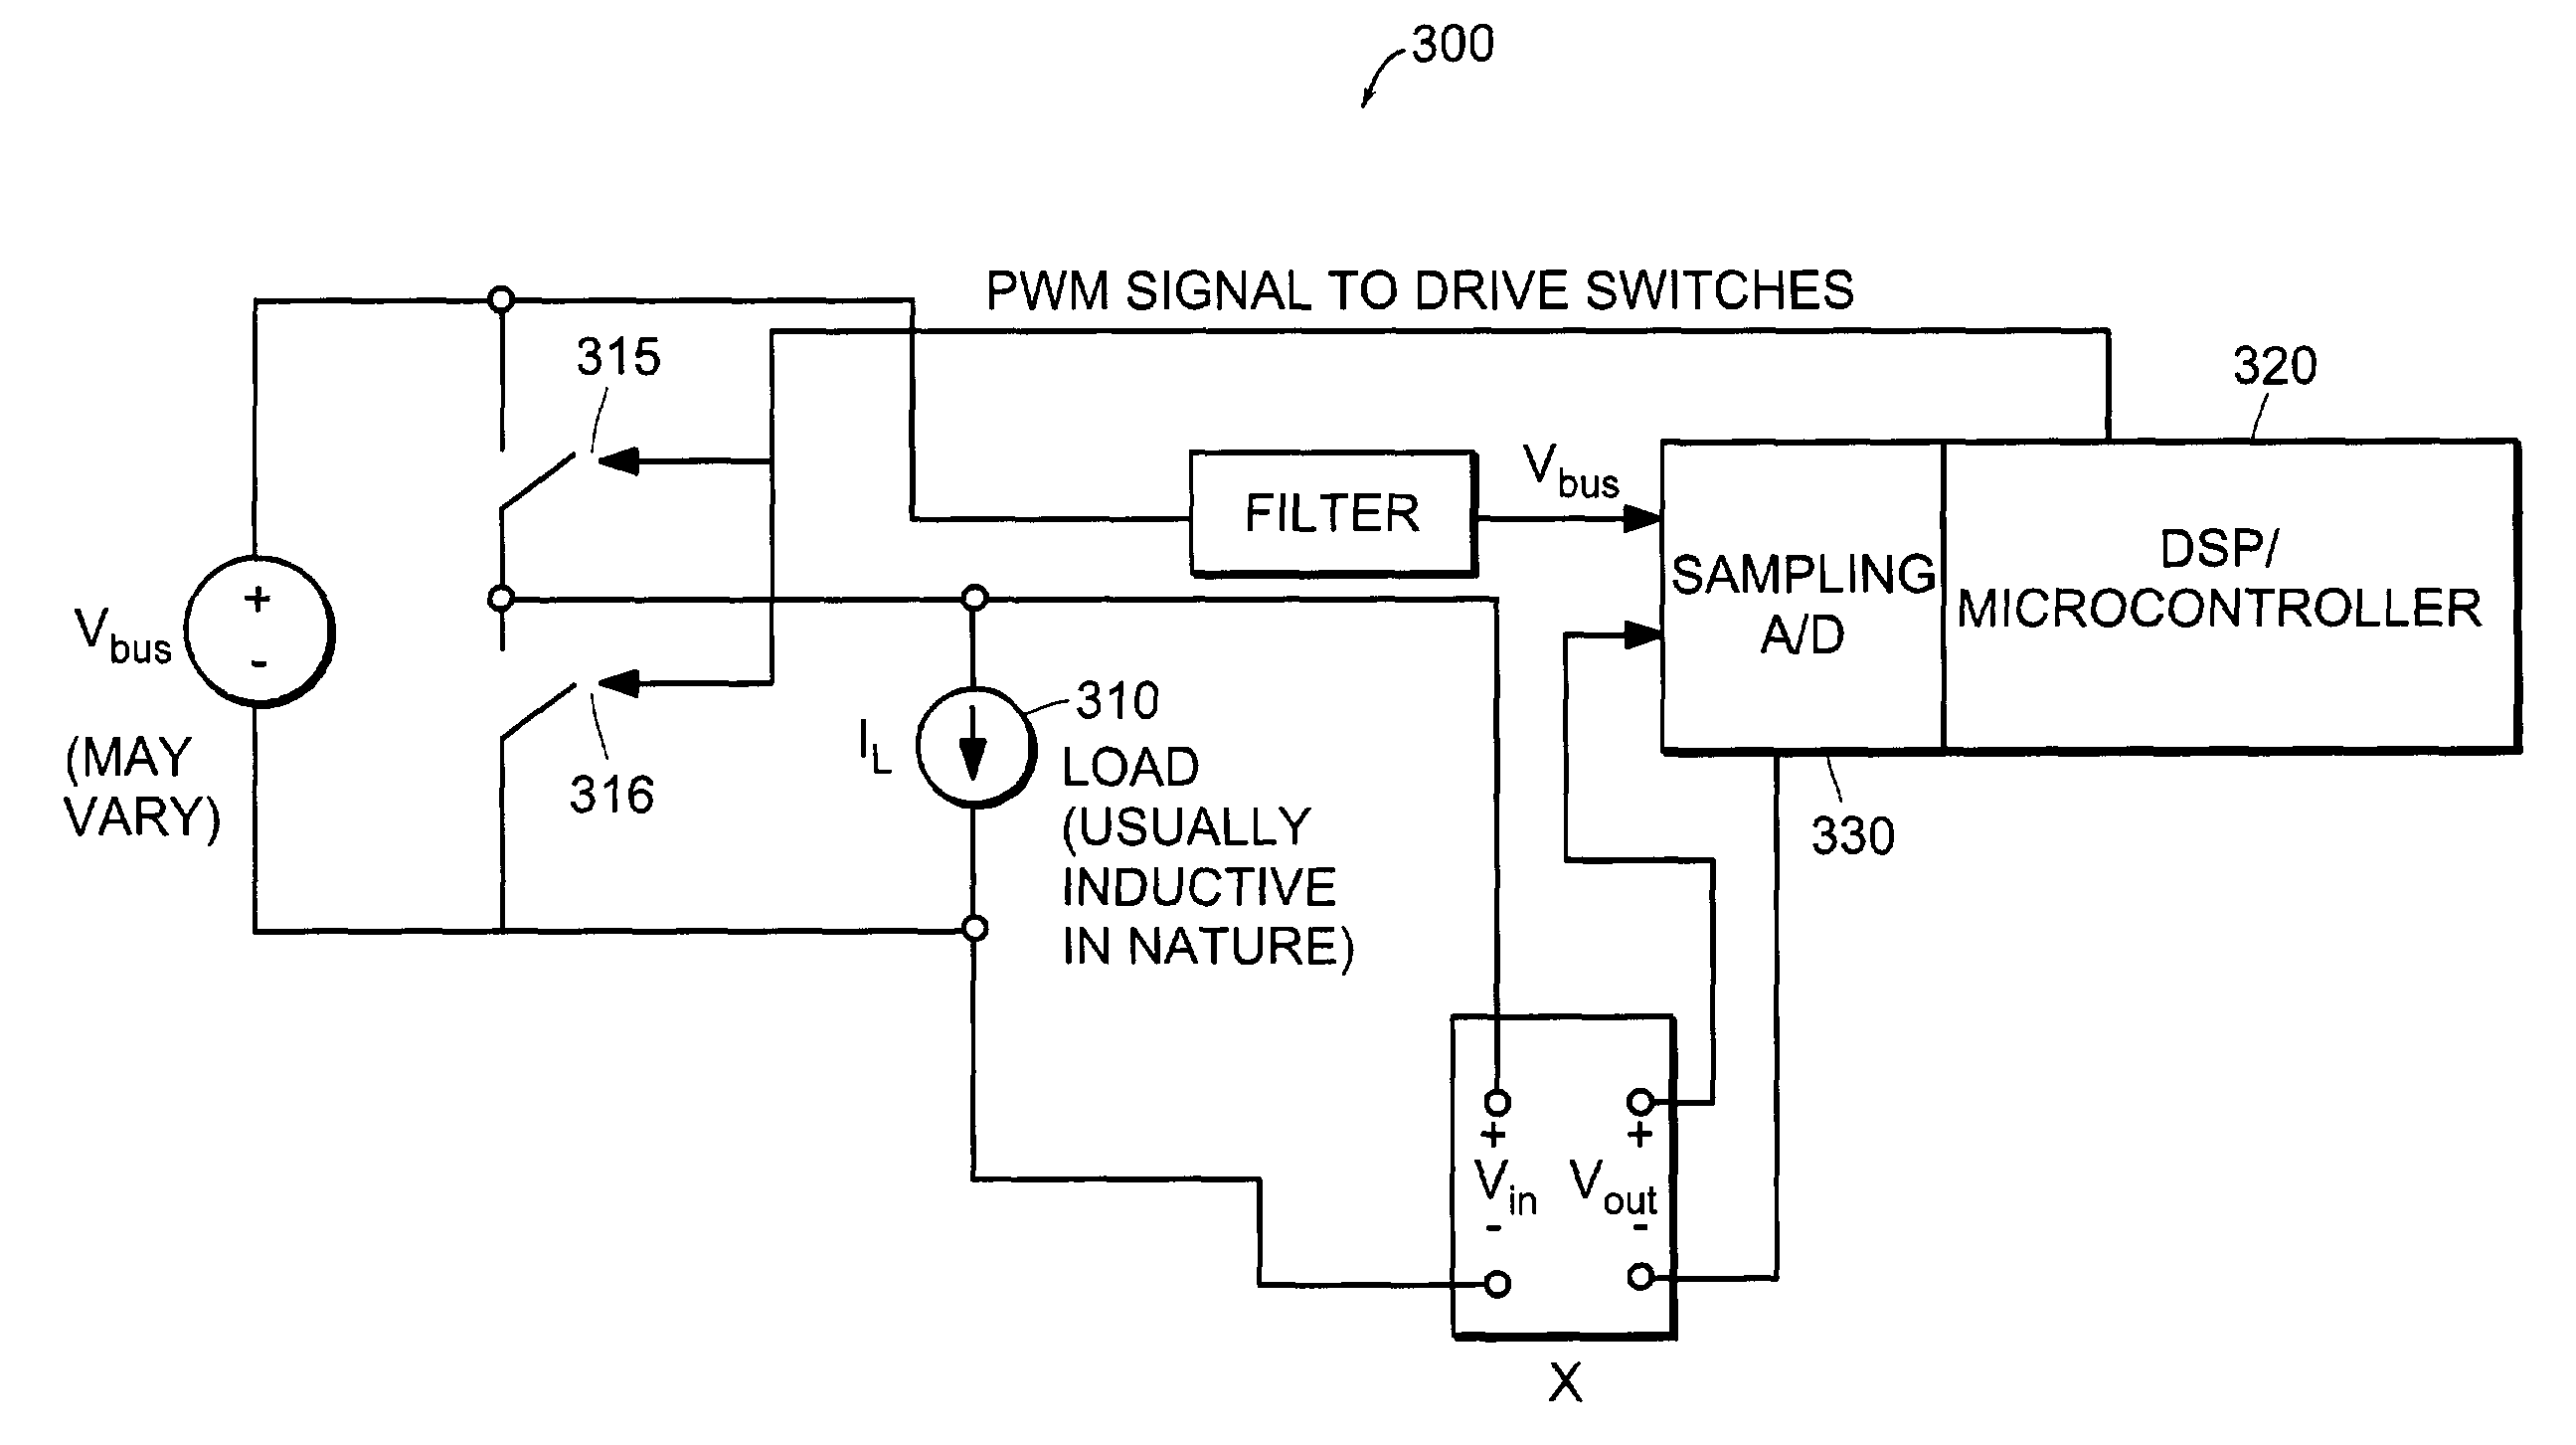 Synchronous sampling of PWM waveforms